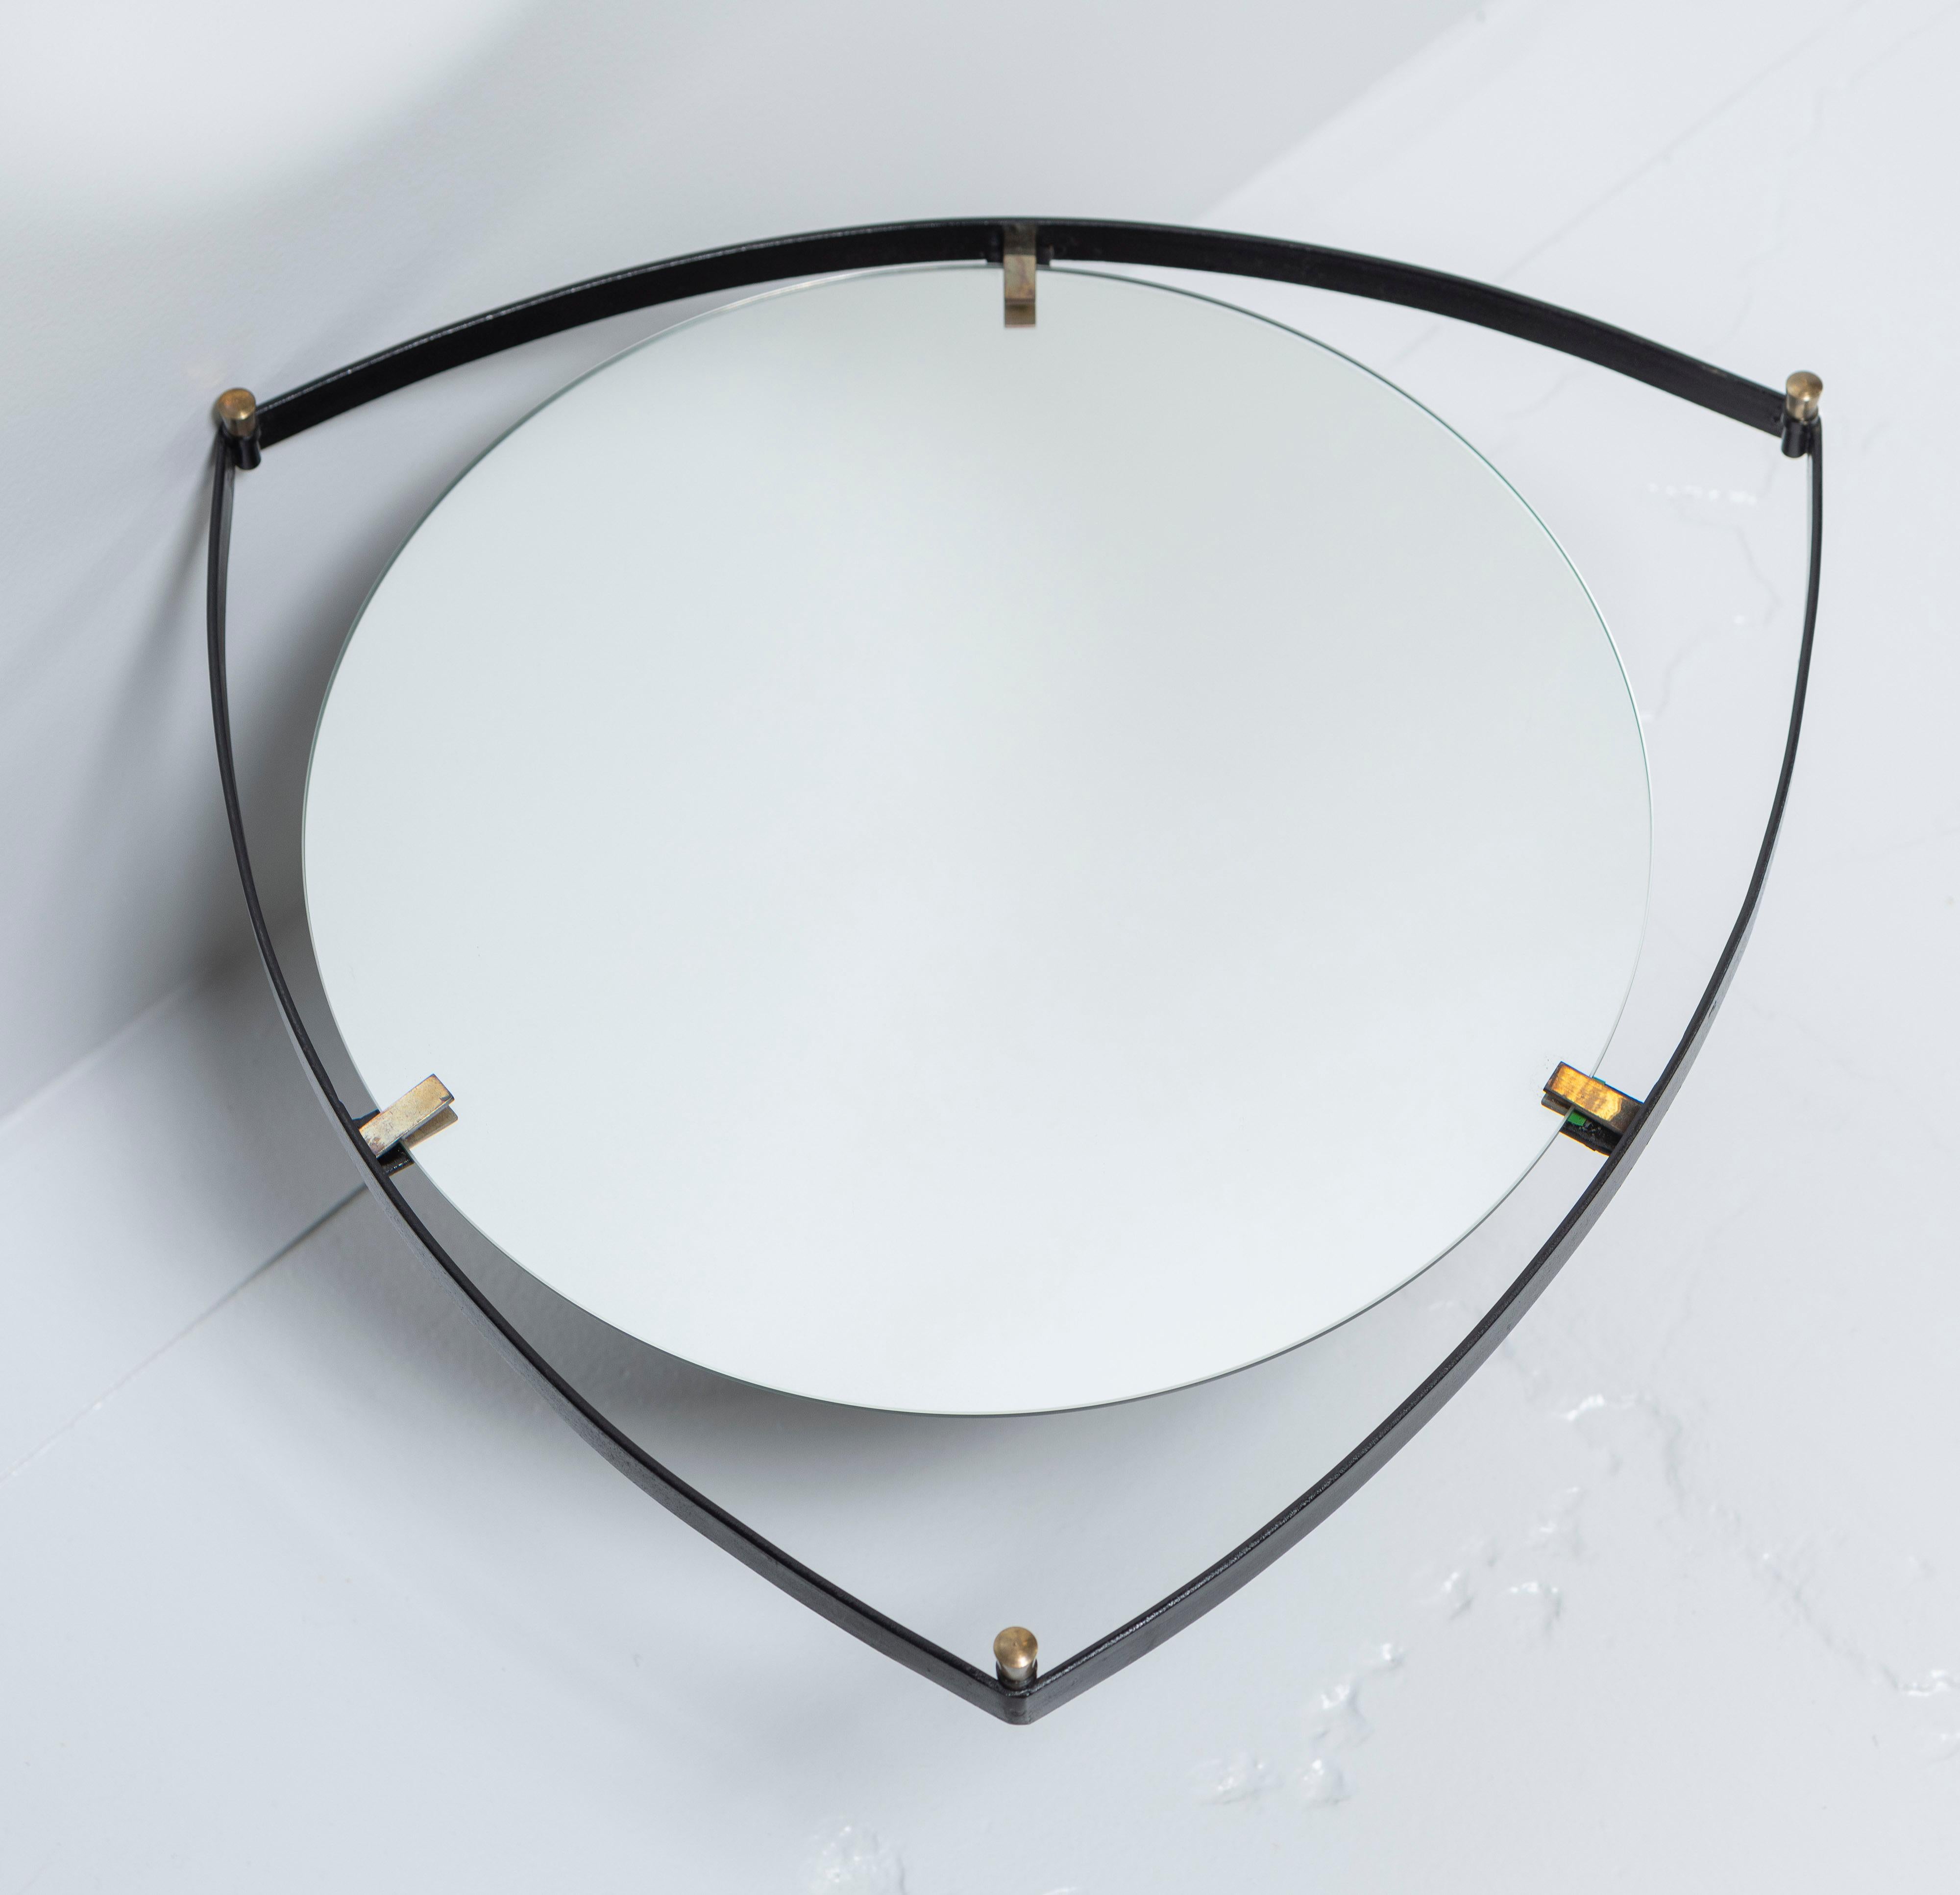 European Mid-Century Modern Mirror from Italy, Metal Frame with Brass Details